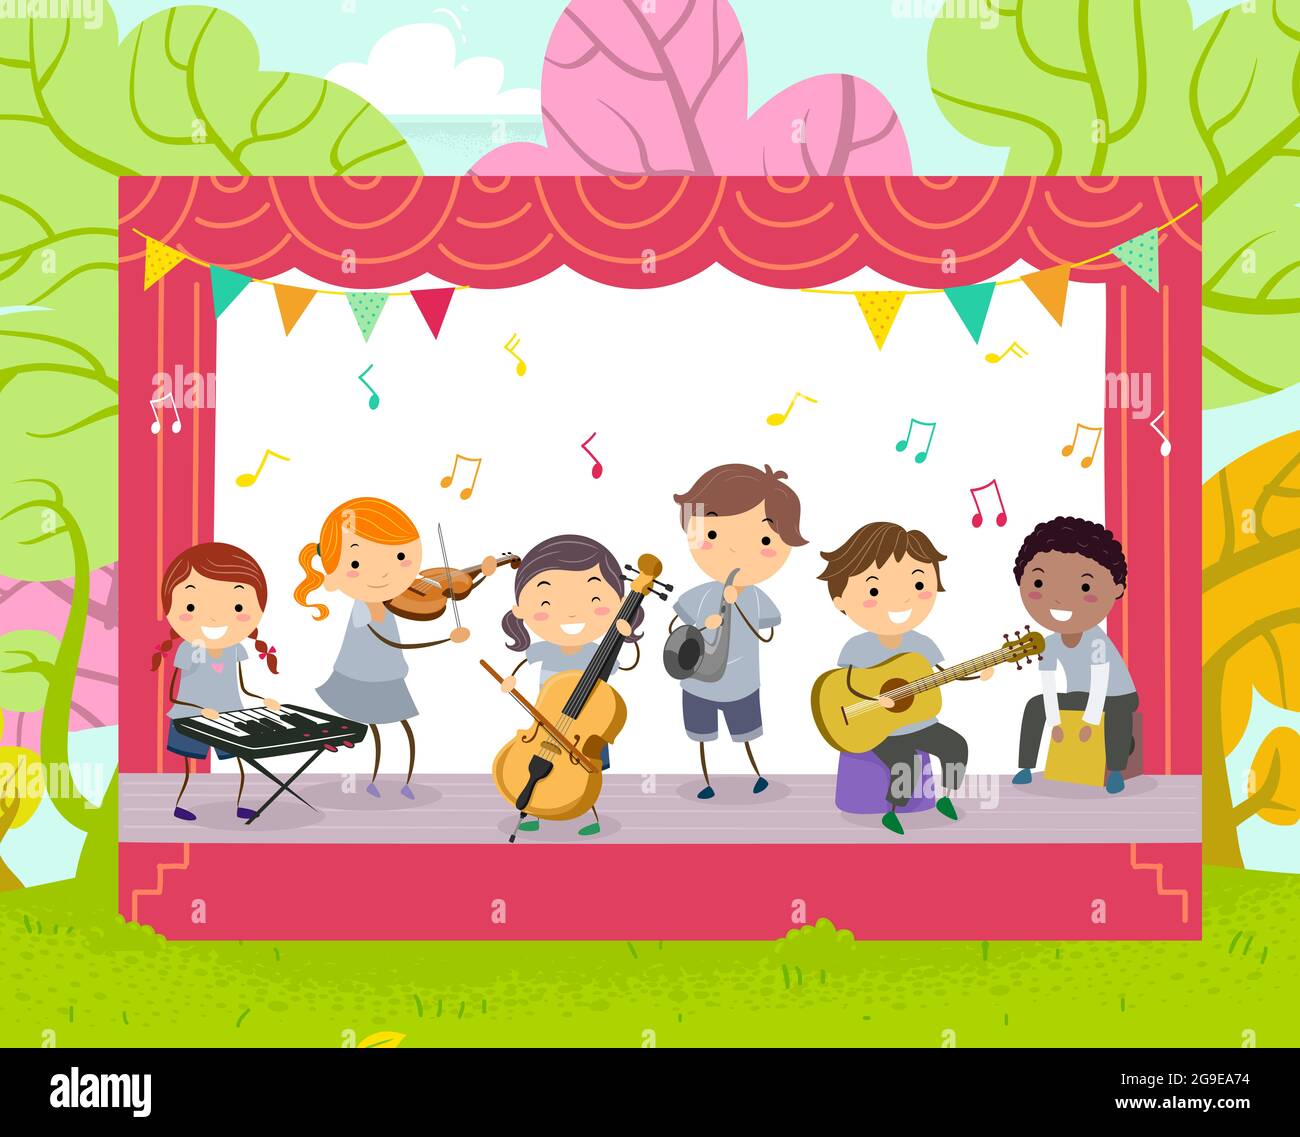 Illustration of Stickman Kids Playing Musical Instruments on an Outdoor Stage Stock Photo